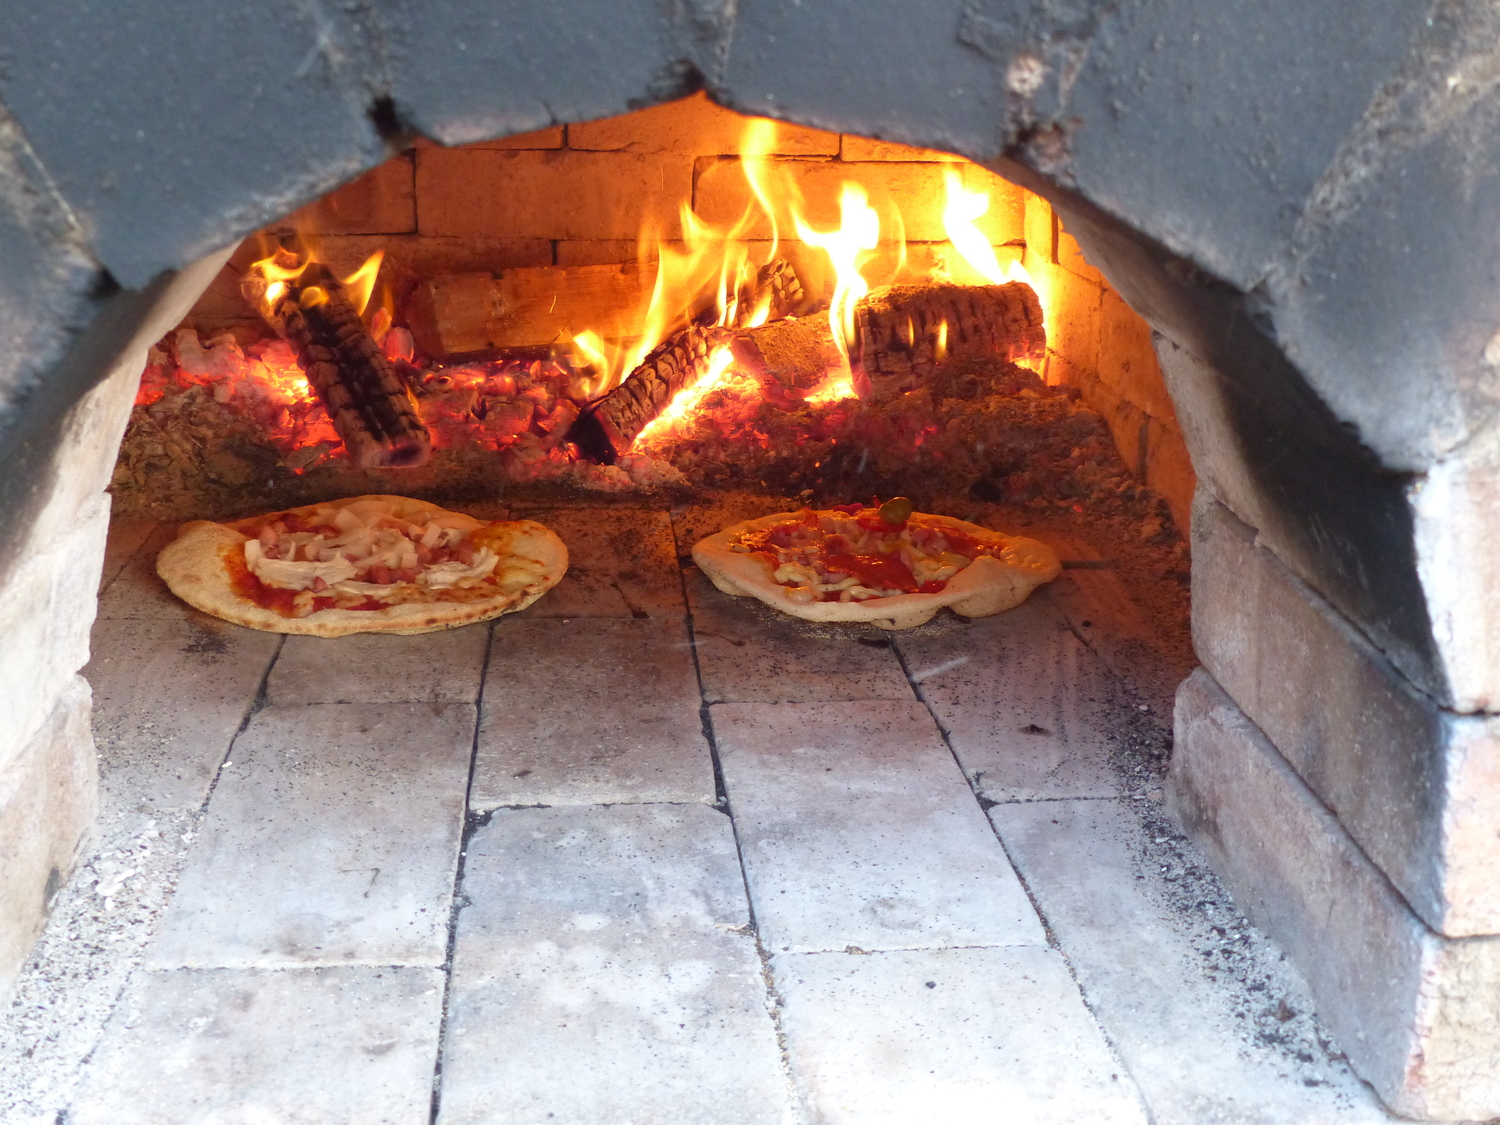 Build Your Own Pizza Oven By Andy Moyle, Building An Outdoor Pizza Oven Uk